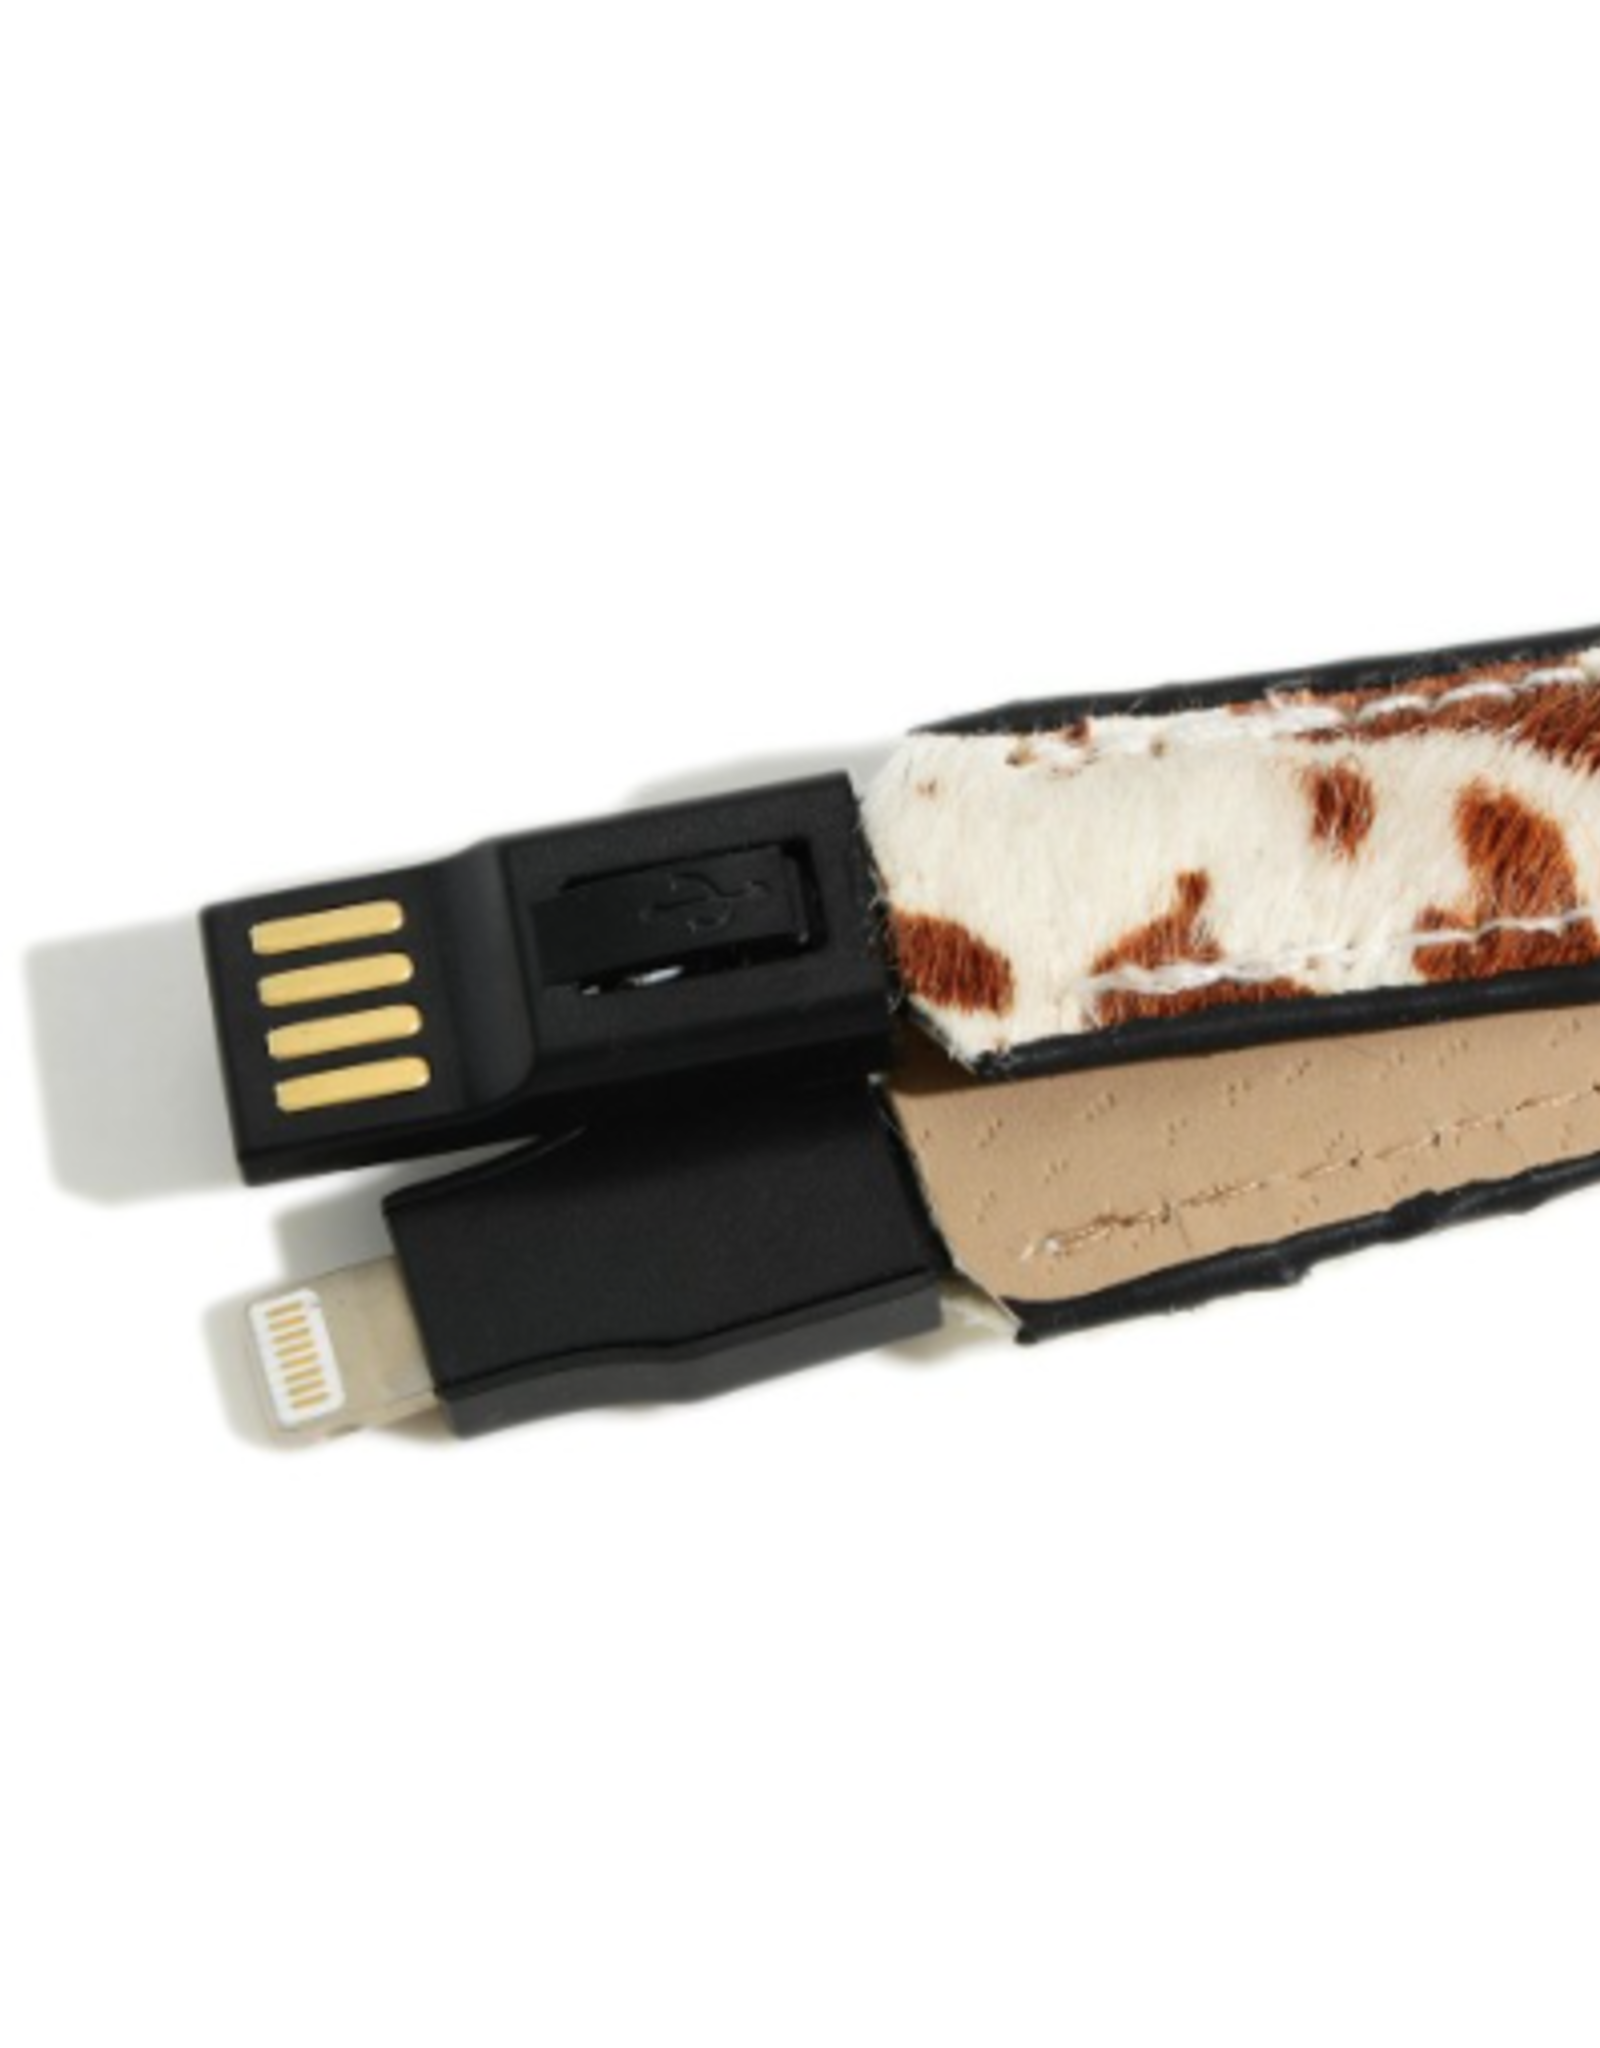 KEY CHAIN FAUX LEATHER ANIMAL PRINT W/USB CHARGE CABLE